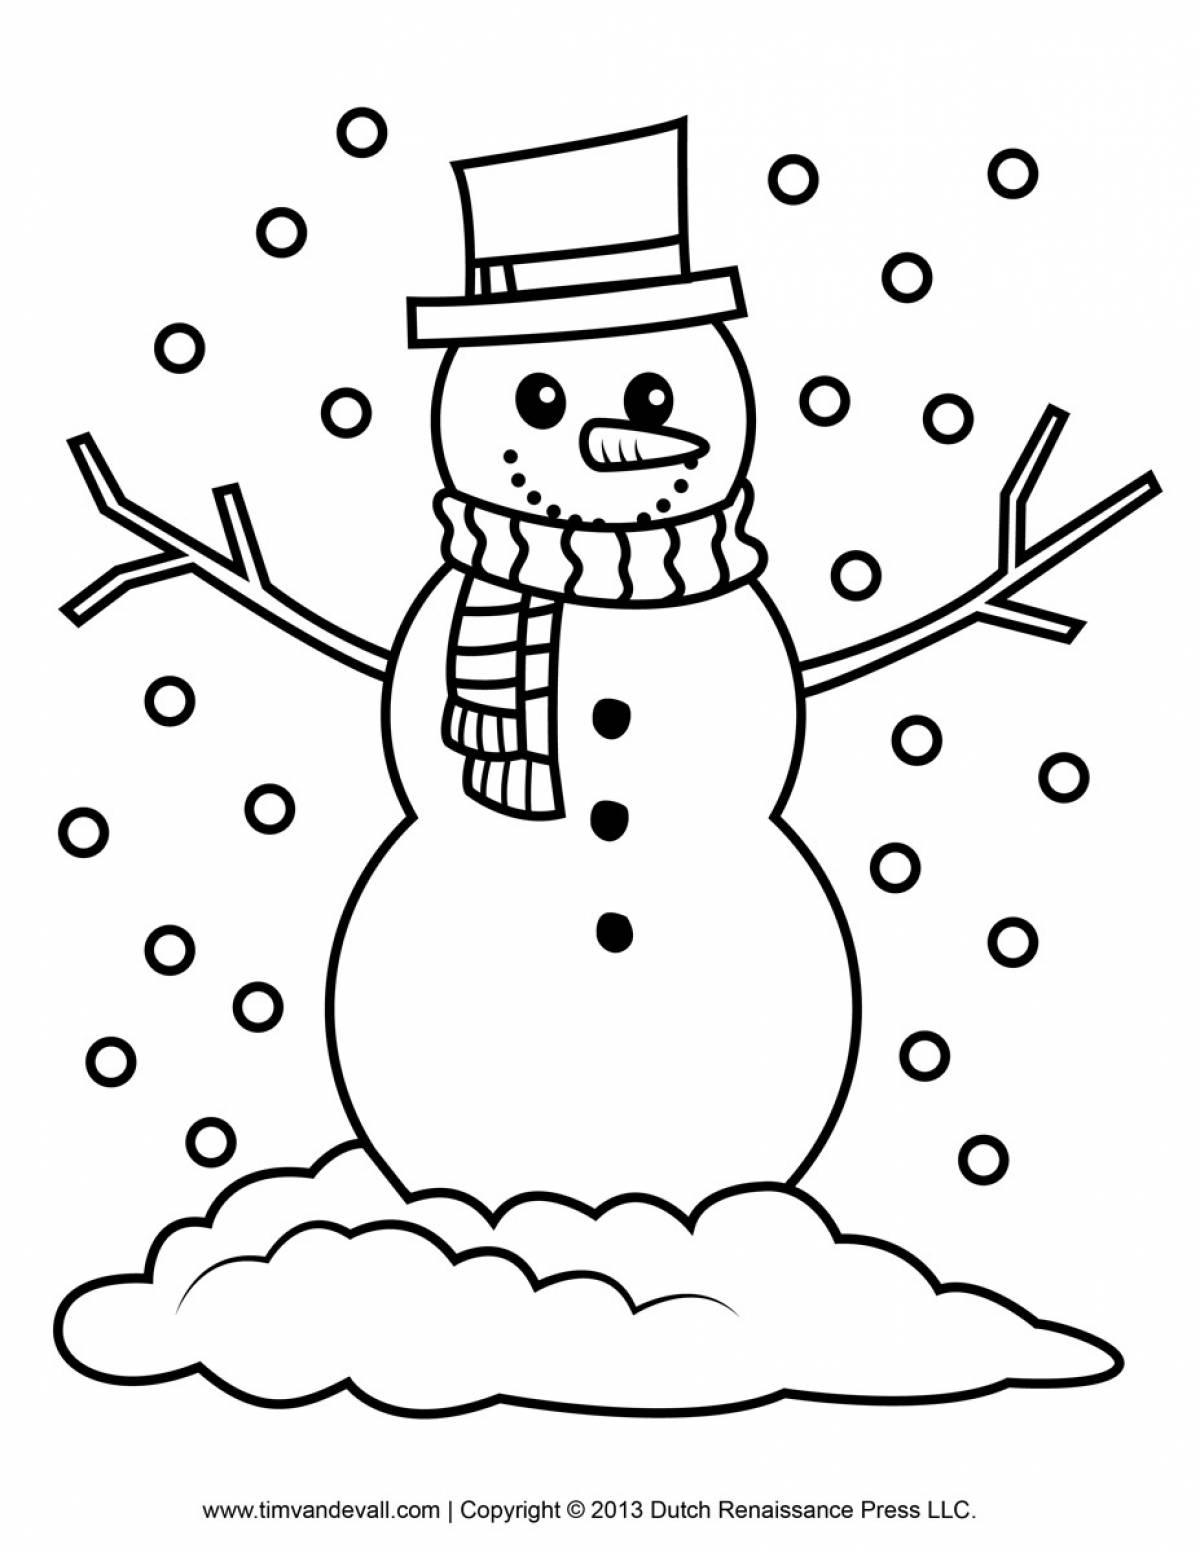 Coloring page twinkling snowman